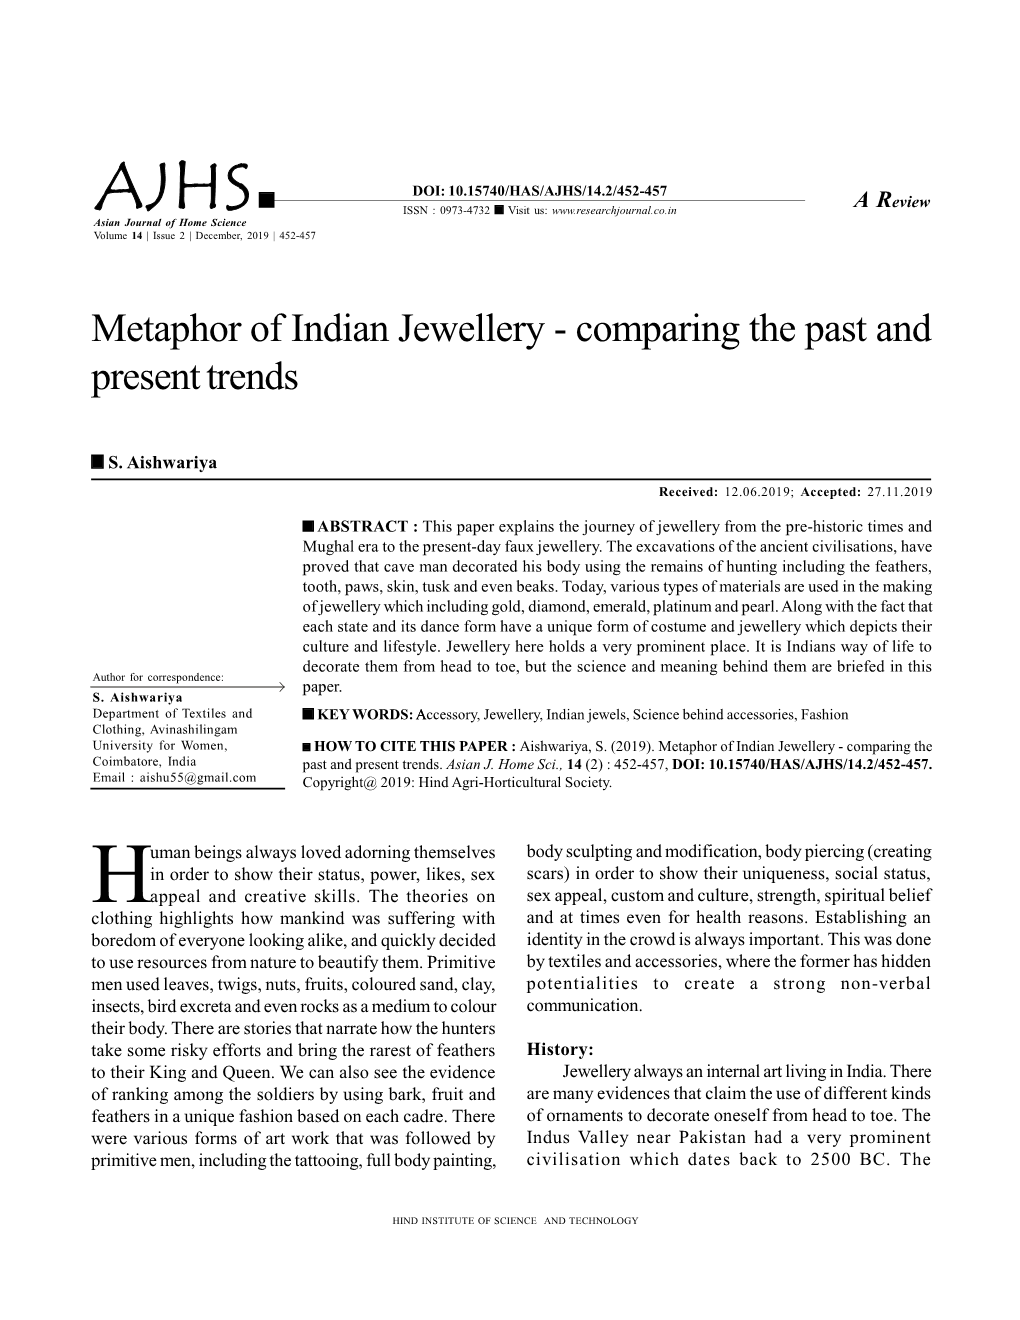 Metaphor of Indian Jewellery - Comparing the Past and Present Trends